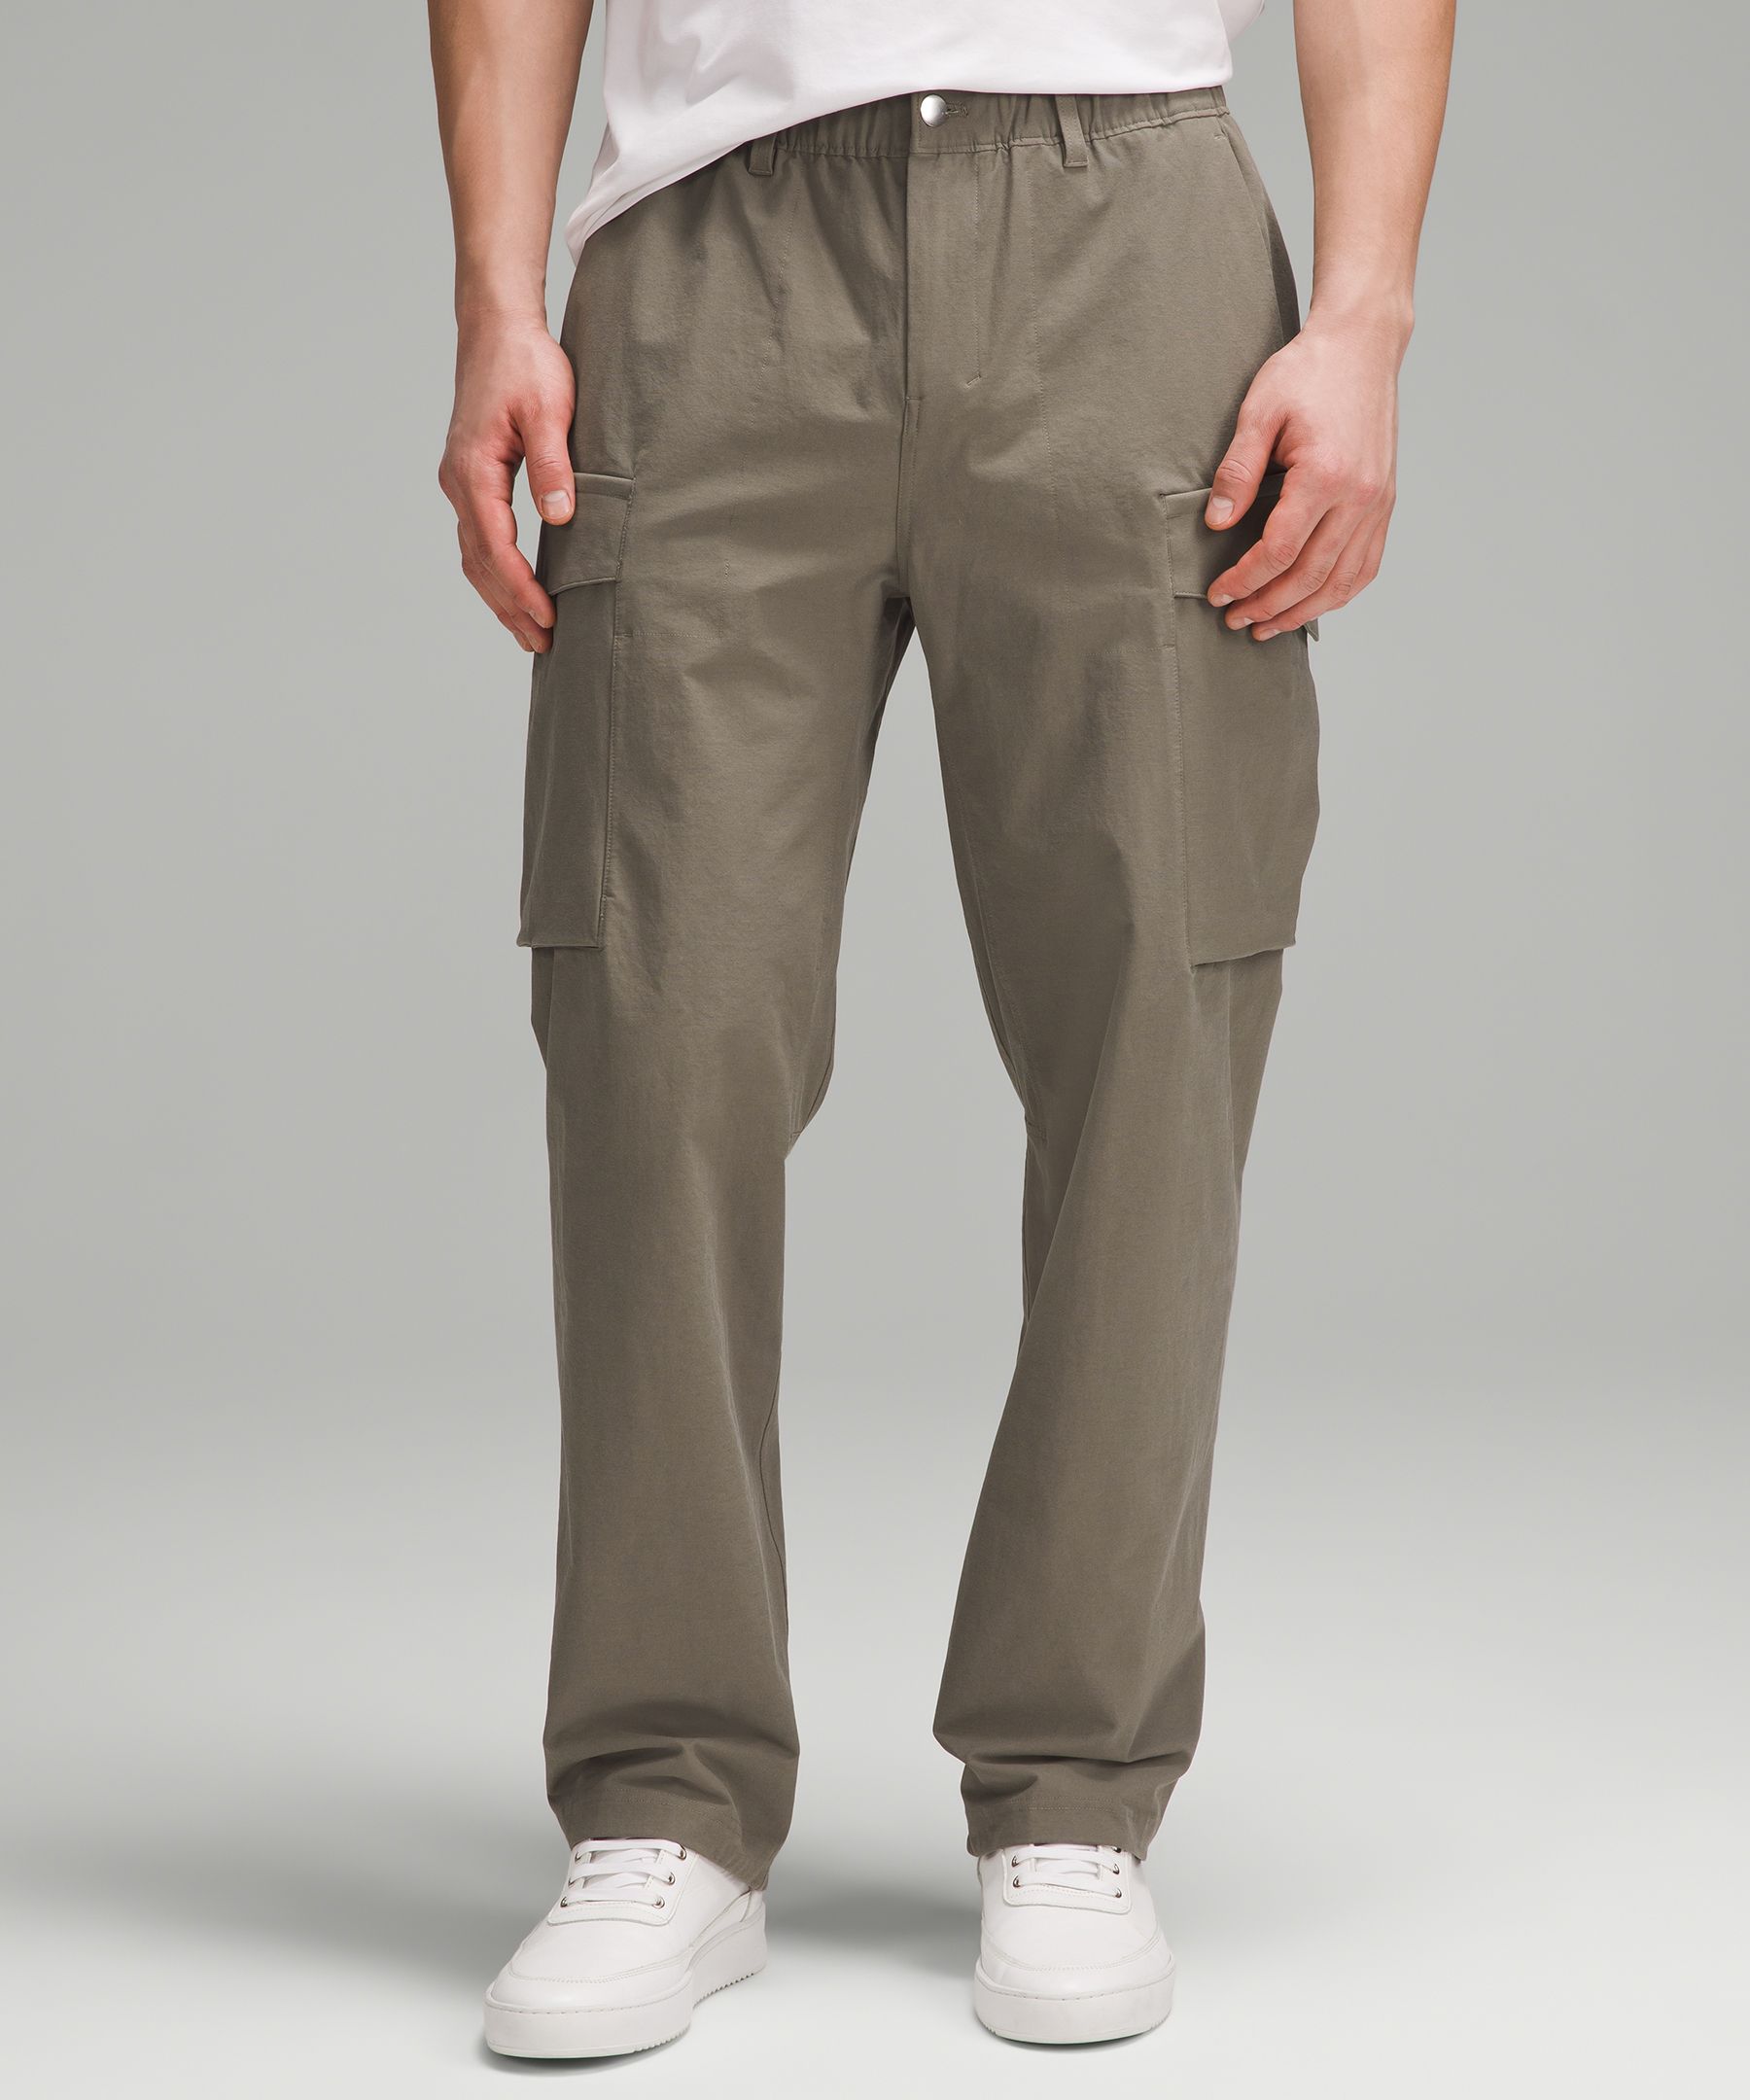 Lululemon Versatwill Relaxed-fit Cargo Pants